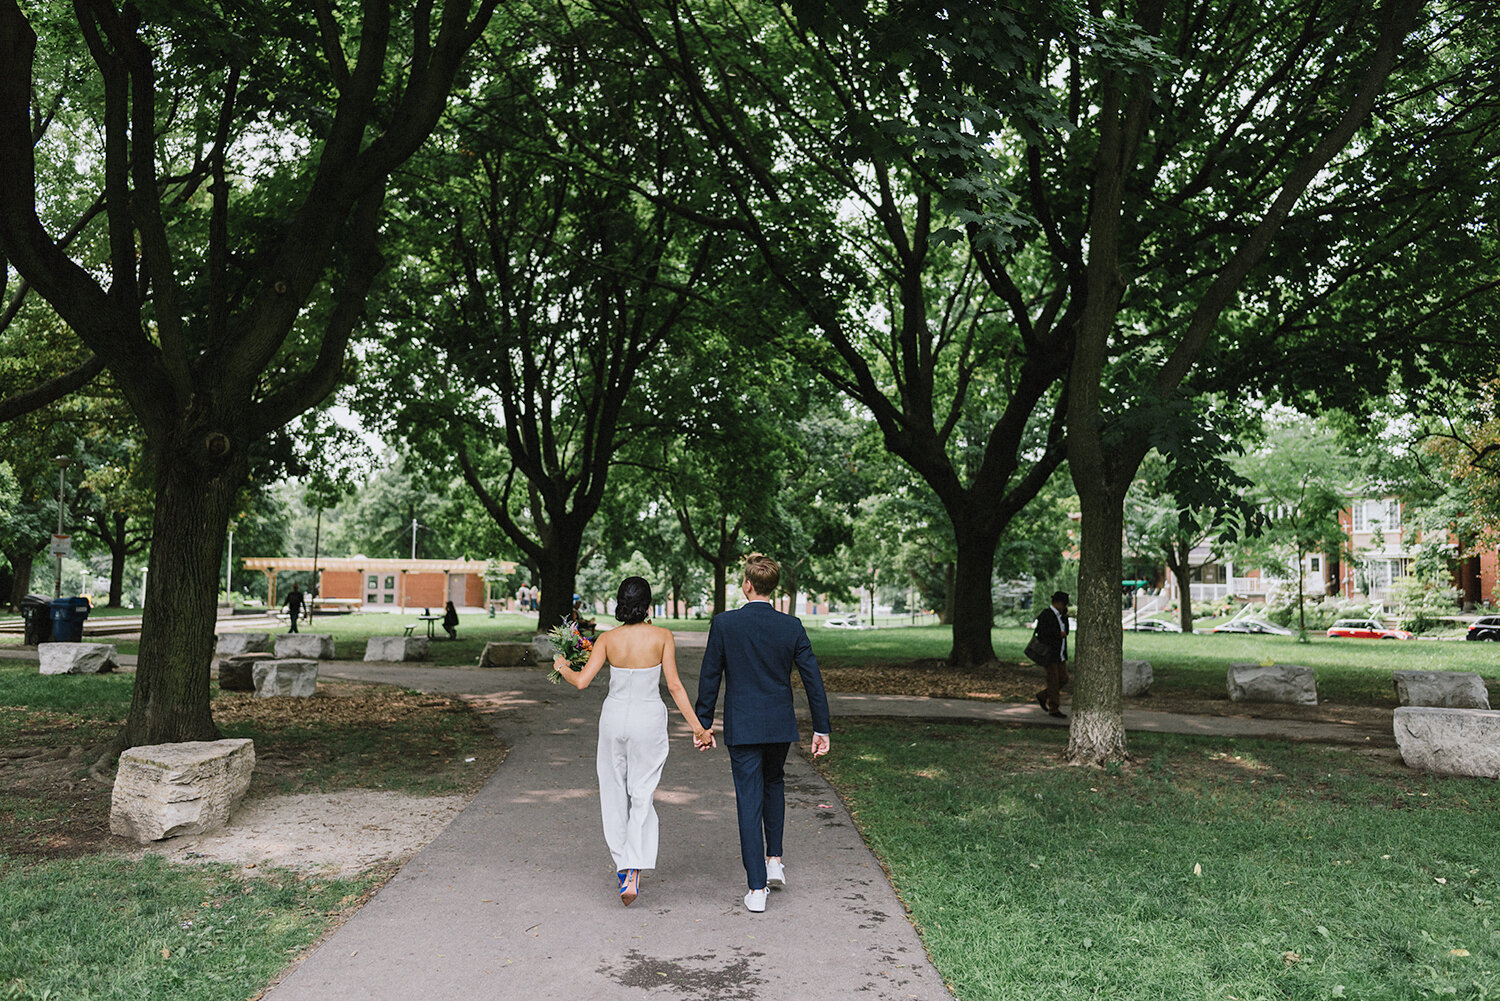 Elopement-Downtown-Urban-film-analog-photography-toronto-wedding-photographers-alternative-hipster-bride-and-groom-badass-ceremony-guests-watching-bride-and-groom-vows-film-kodak-portra-800-first-kiss-just-married-recessional-walking-away.JPG